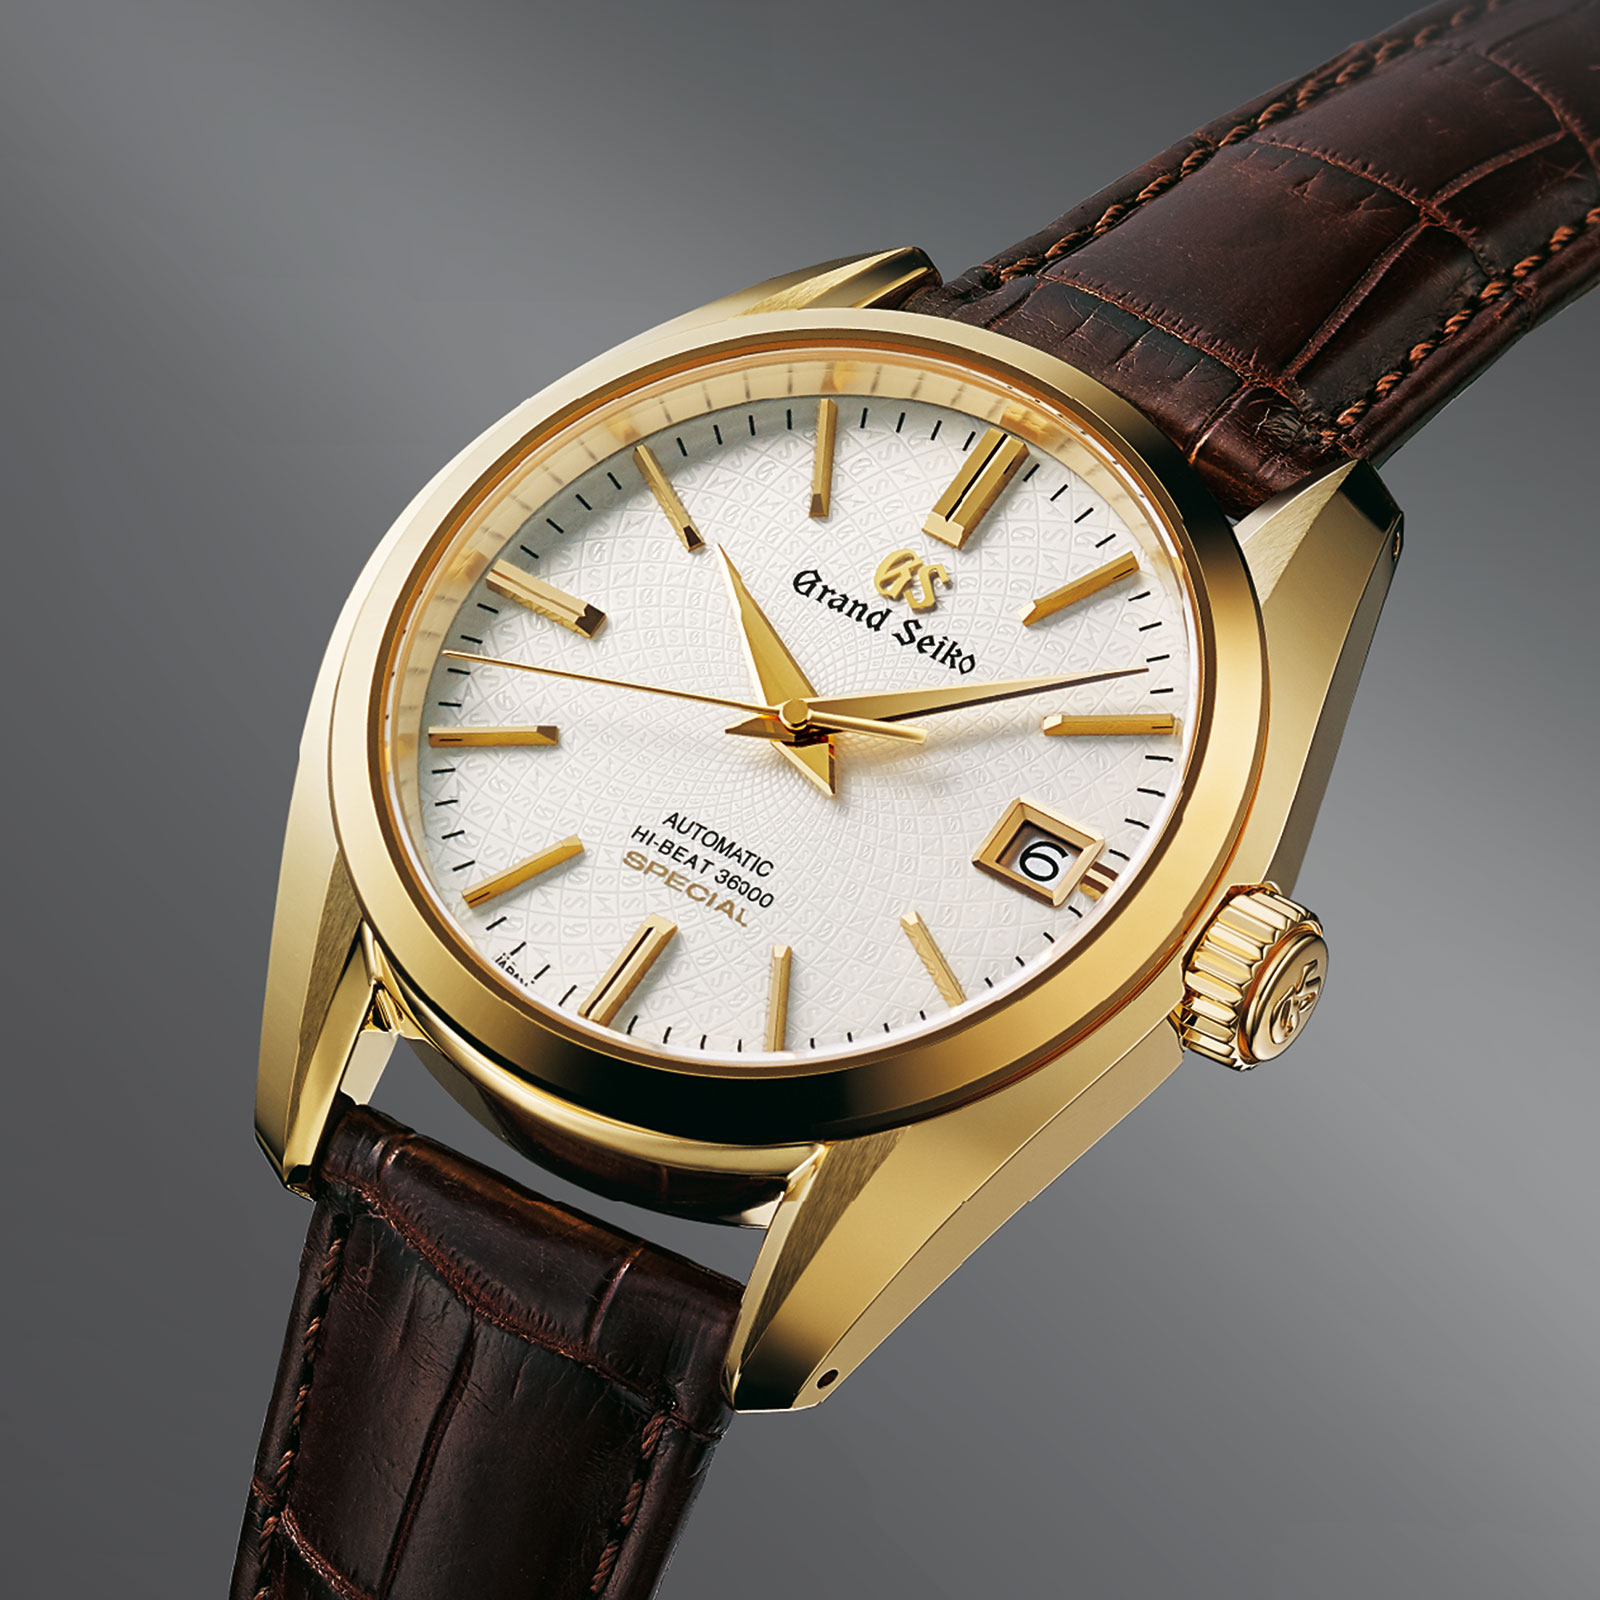 Baselworld 2018: Introducing the Grand Seiko Hi-Beat ., and 9S 20th  Anniversary Editions | SJX Watches